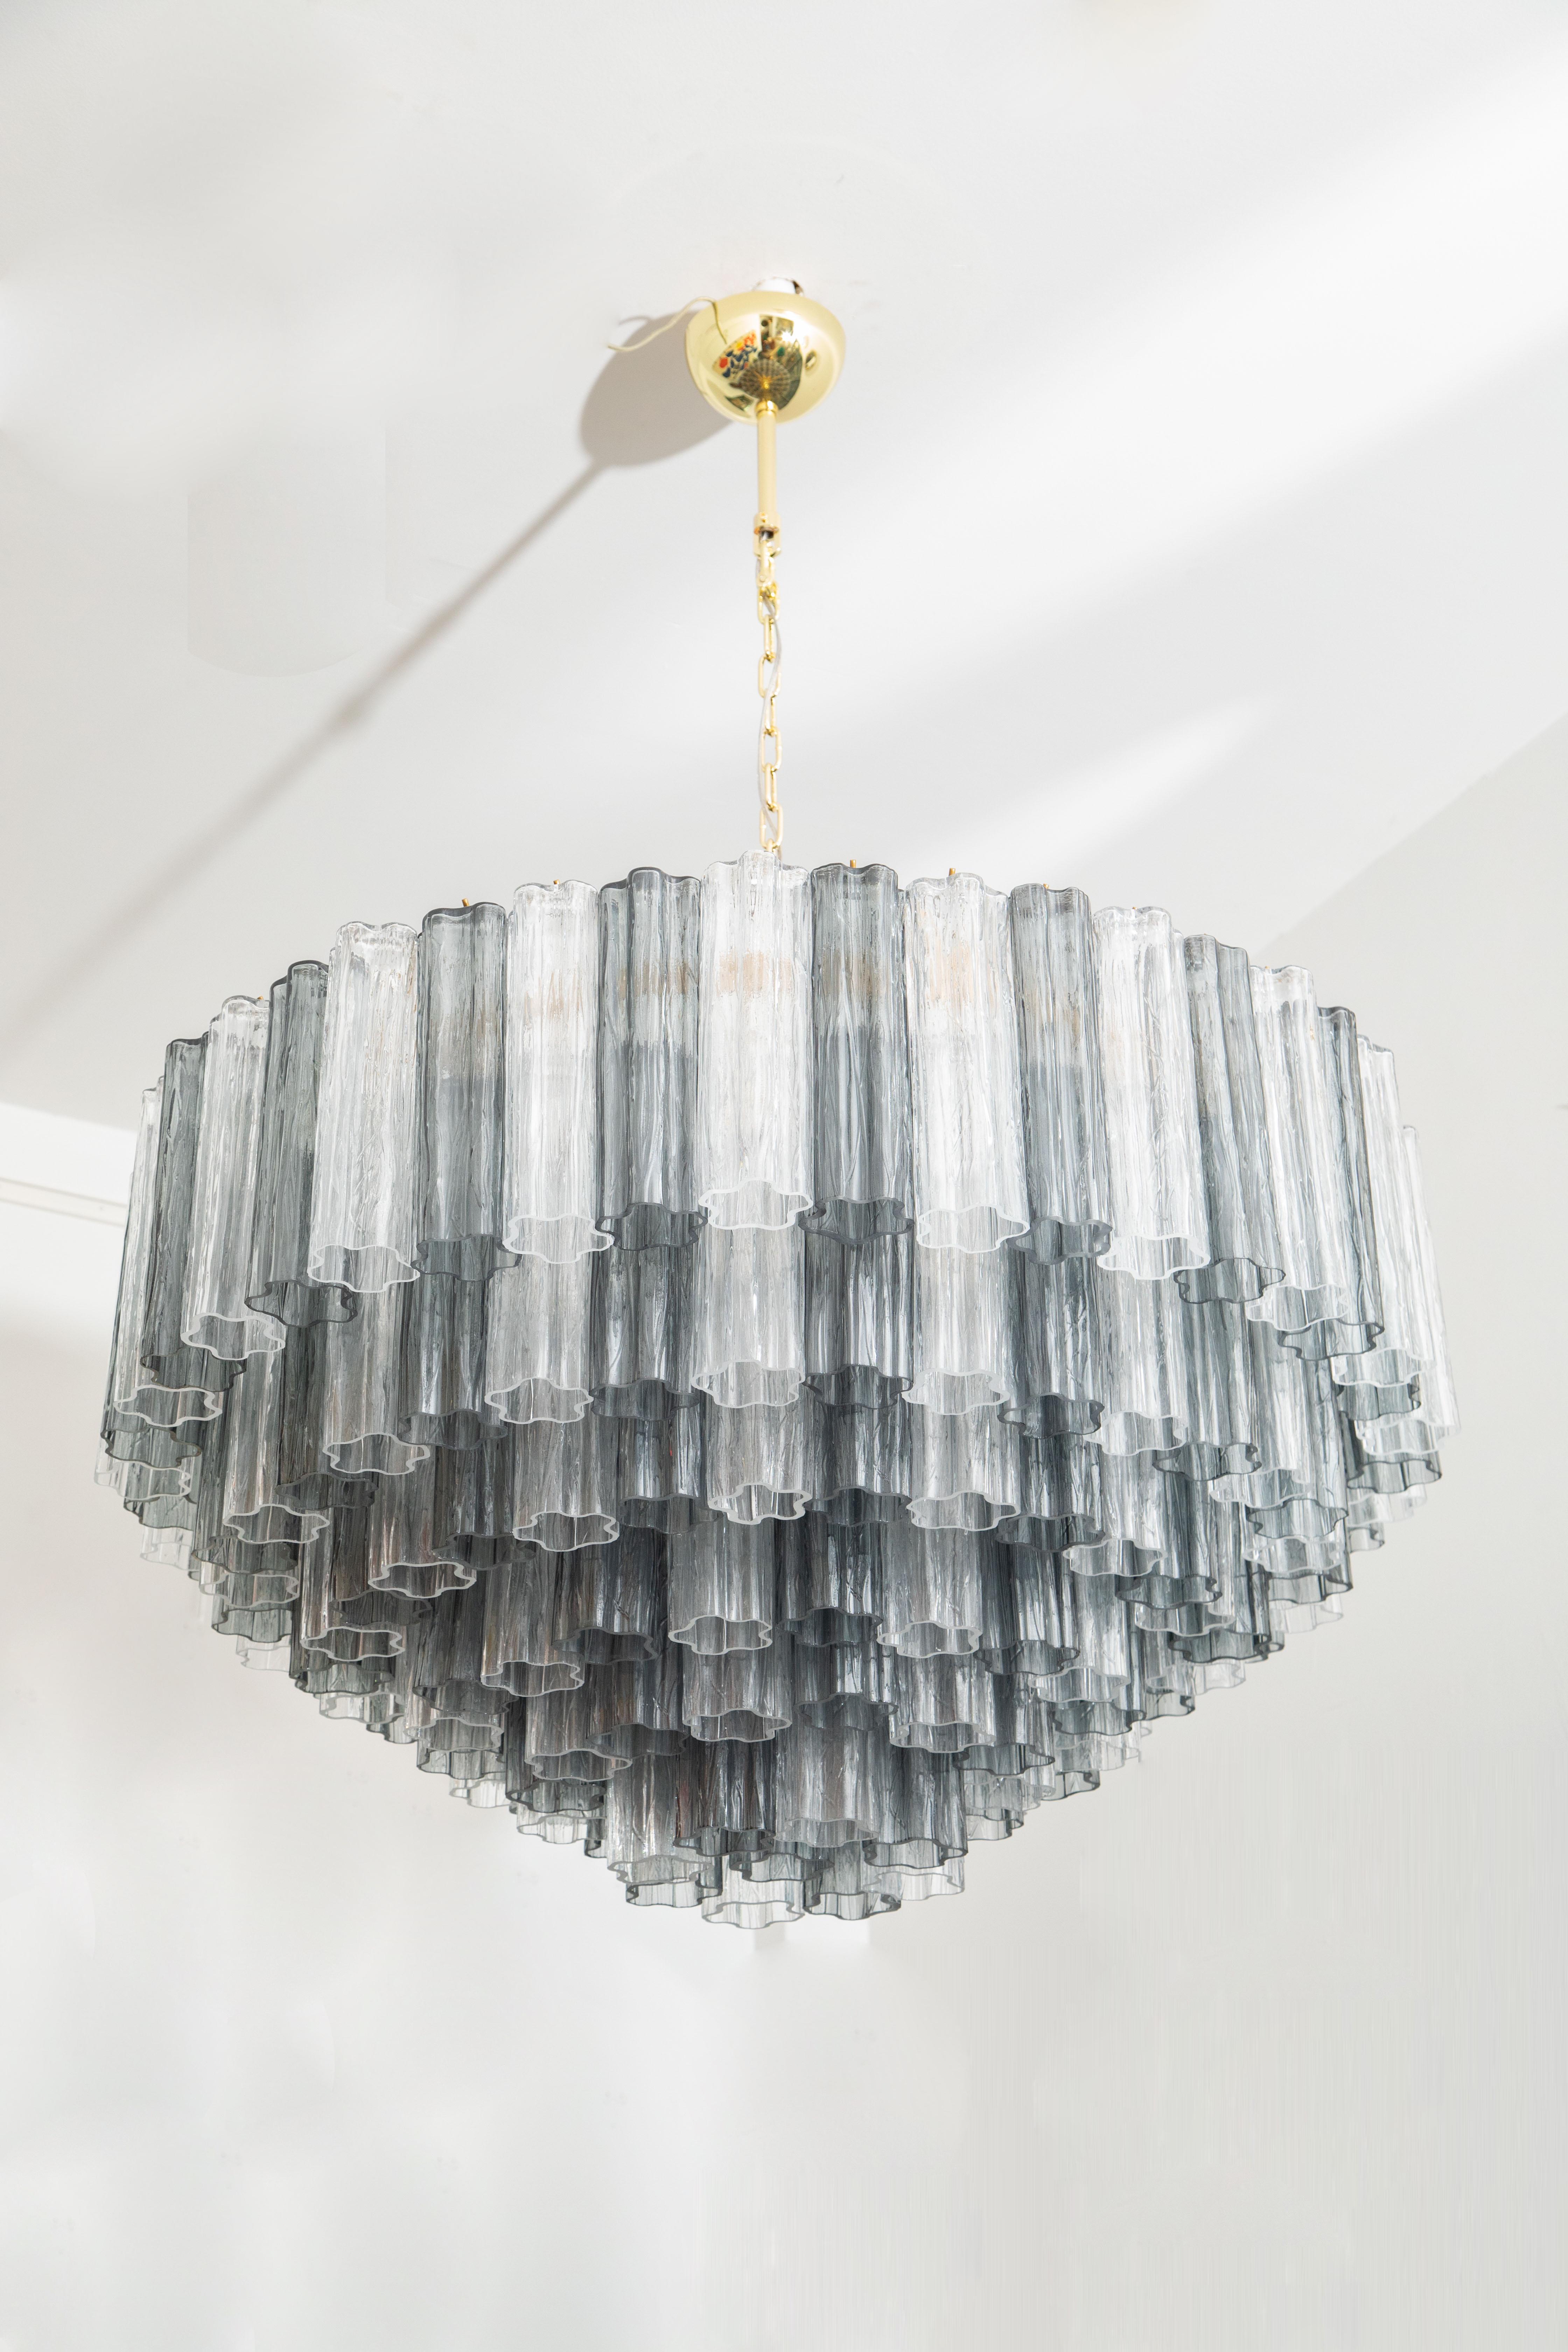 Large cascading Murano clear and teal glass chandelier, in stock 
Six tiers of 269 hand blown clear and grey textured Murano glasses, 
White enameled frame holding 12 bulbs E26
Rewired to the American standard
Possible installation with chain, stem